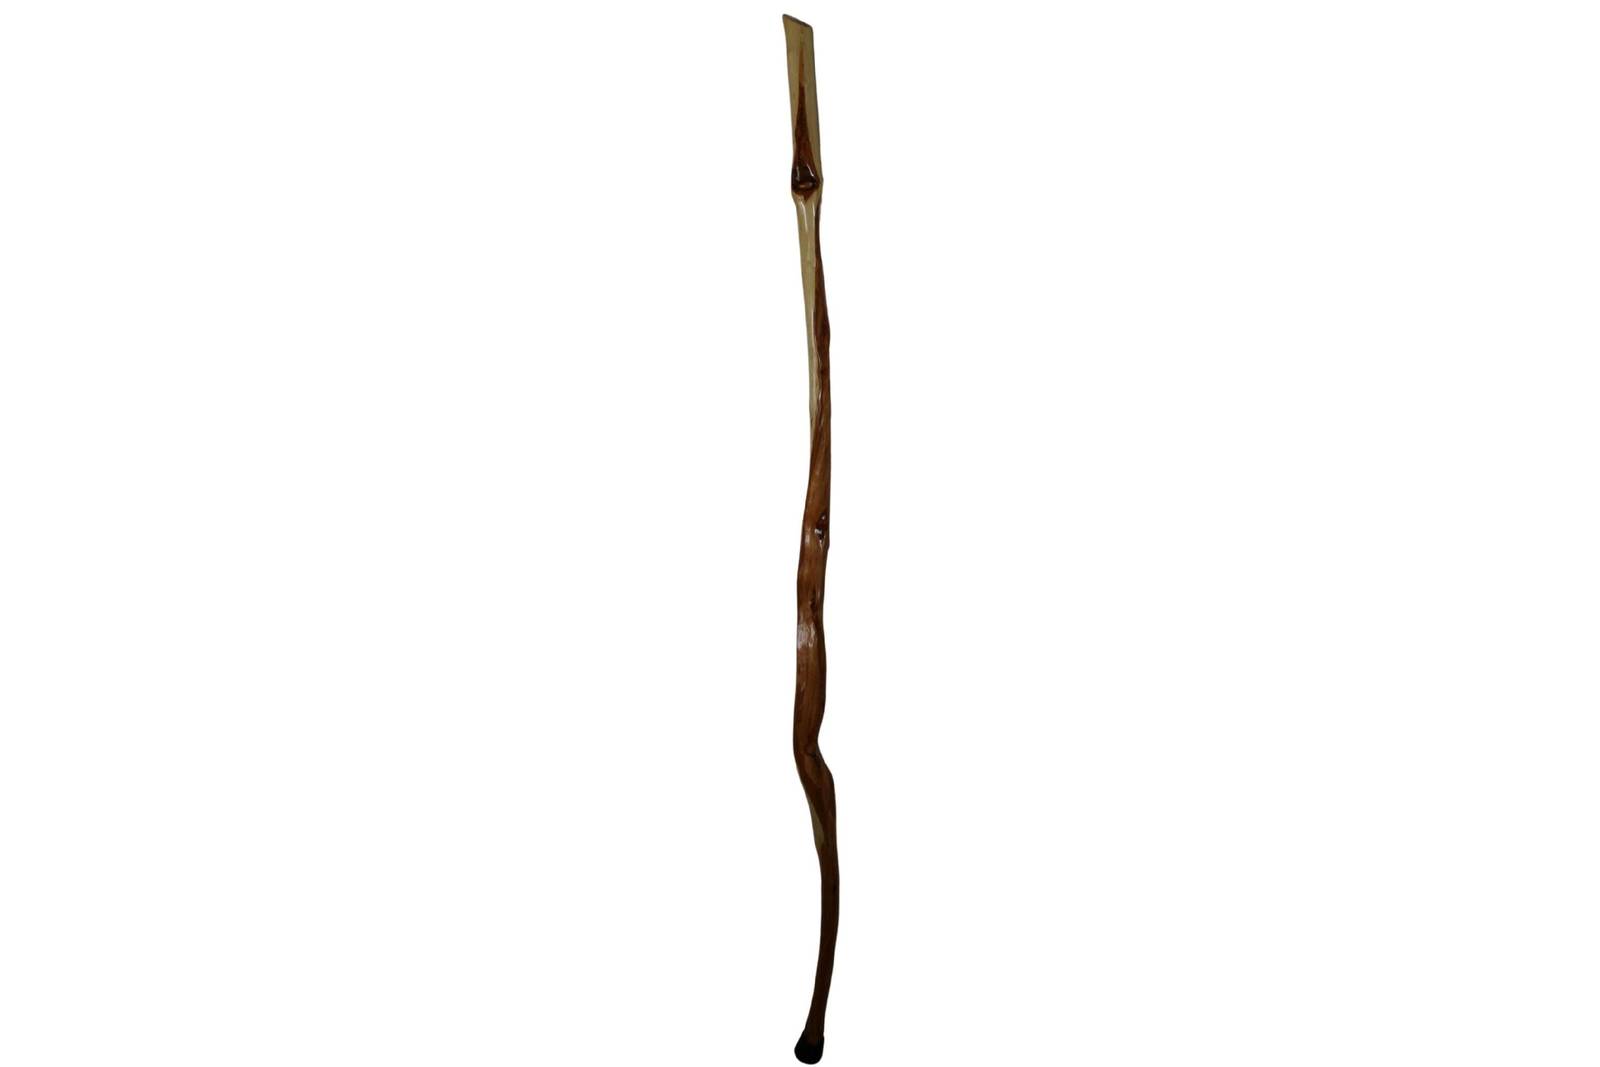 Primary image for 52in Burl Willow Walking Stick, Handcrafted USA